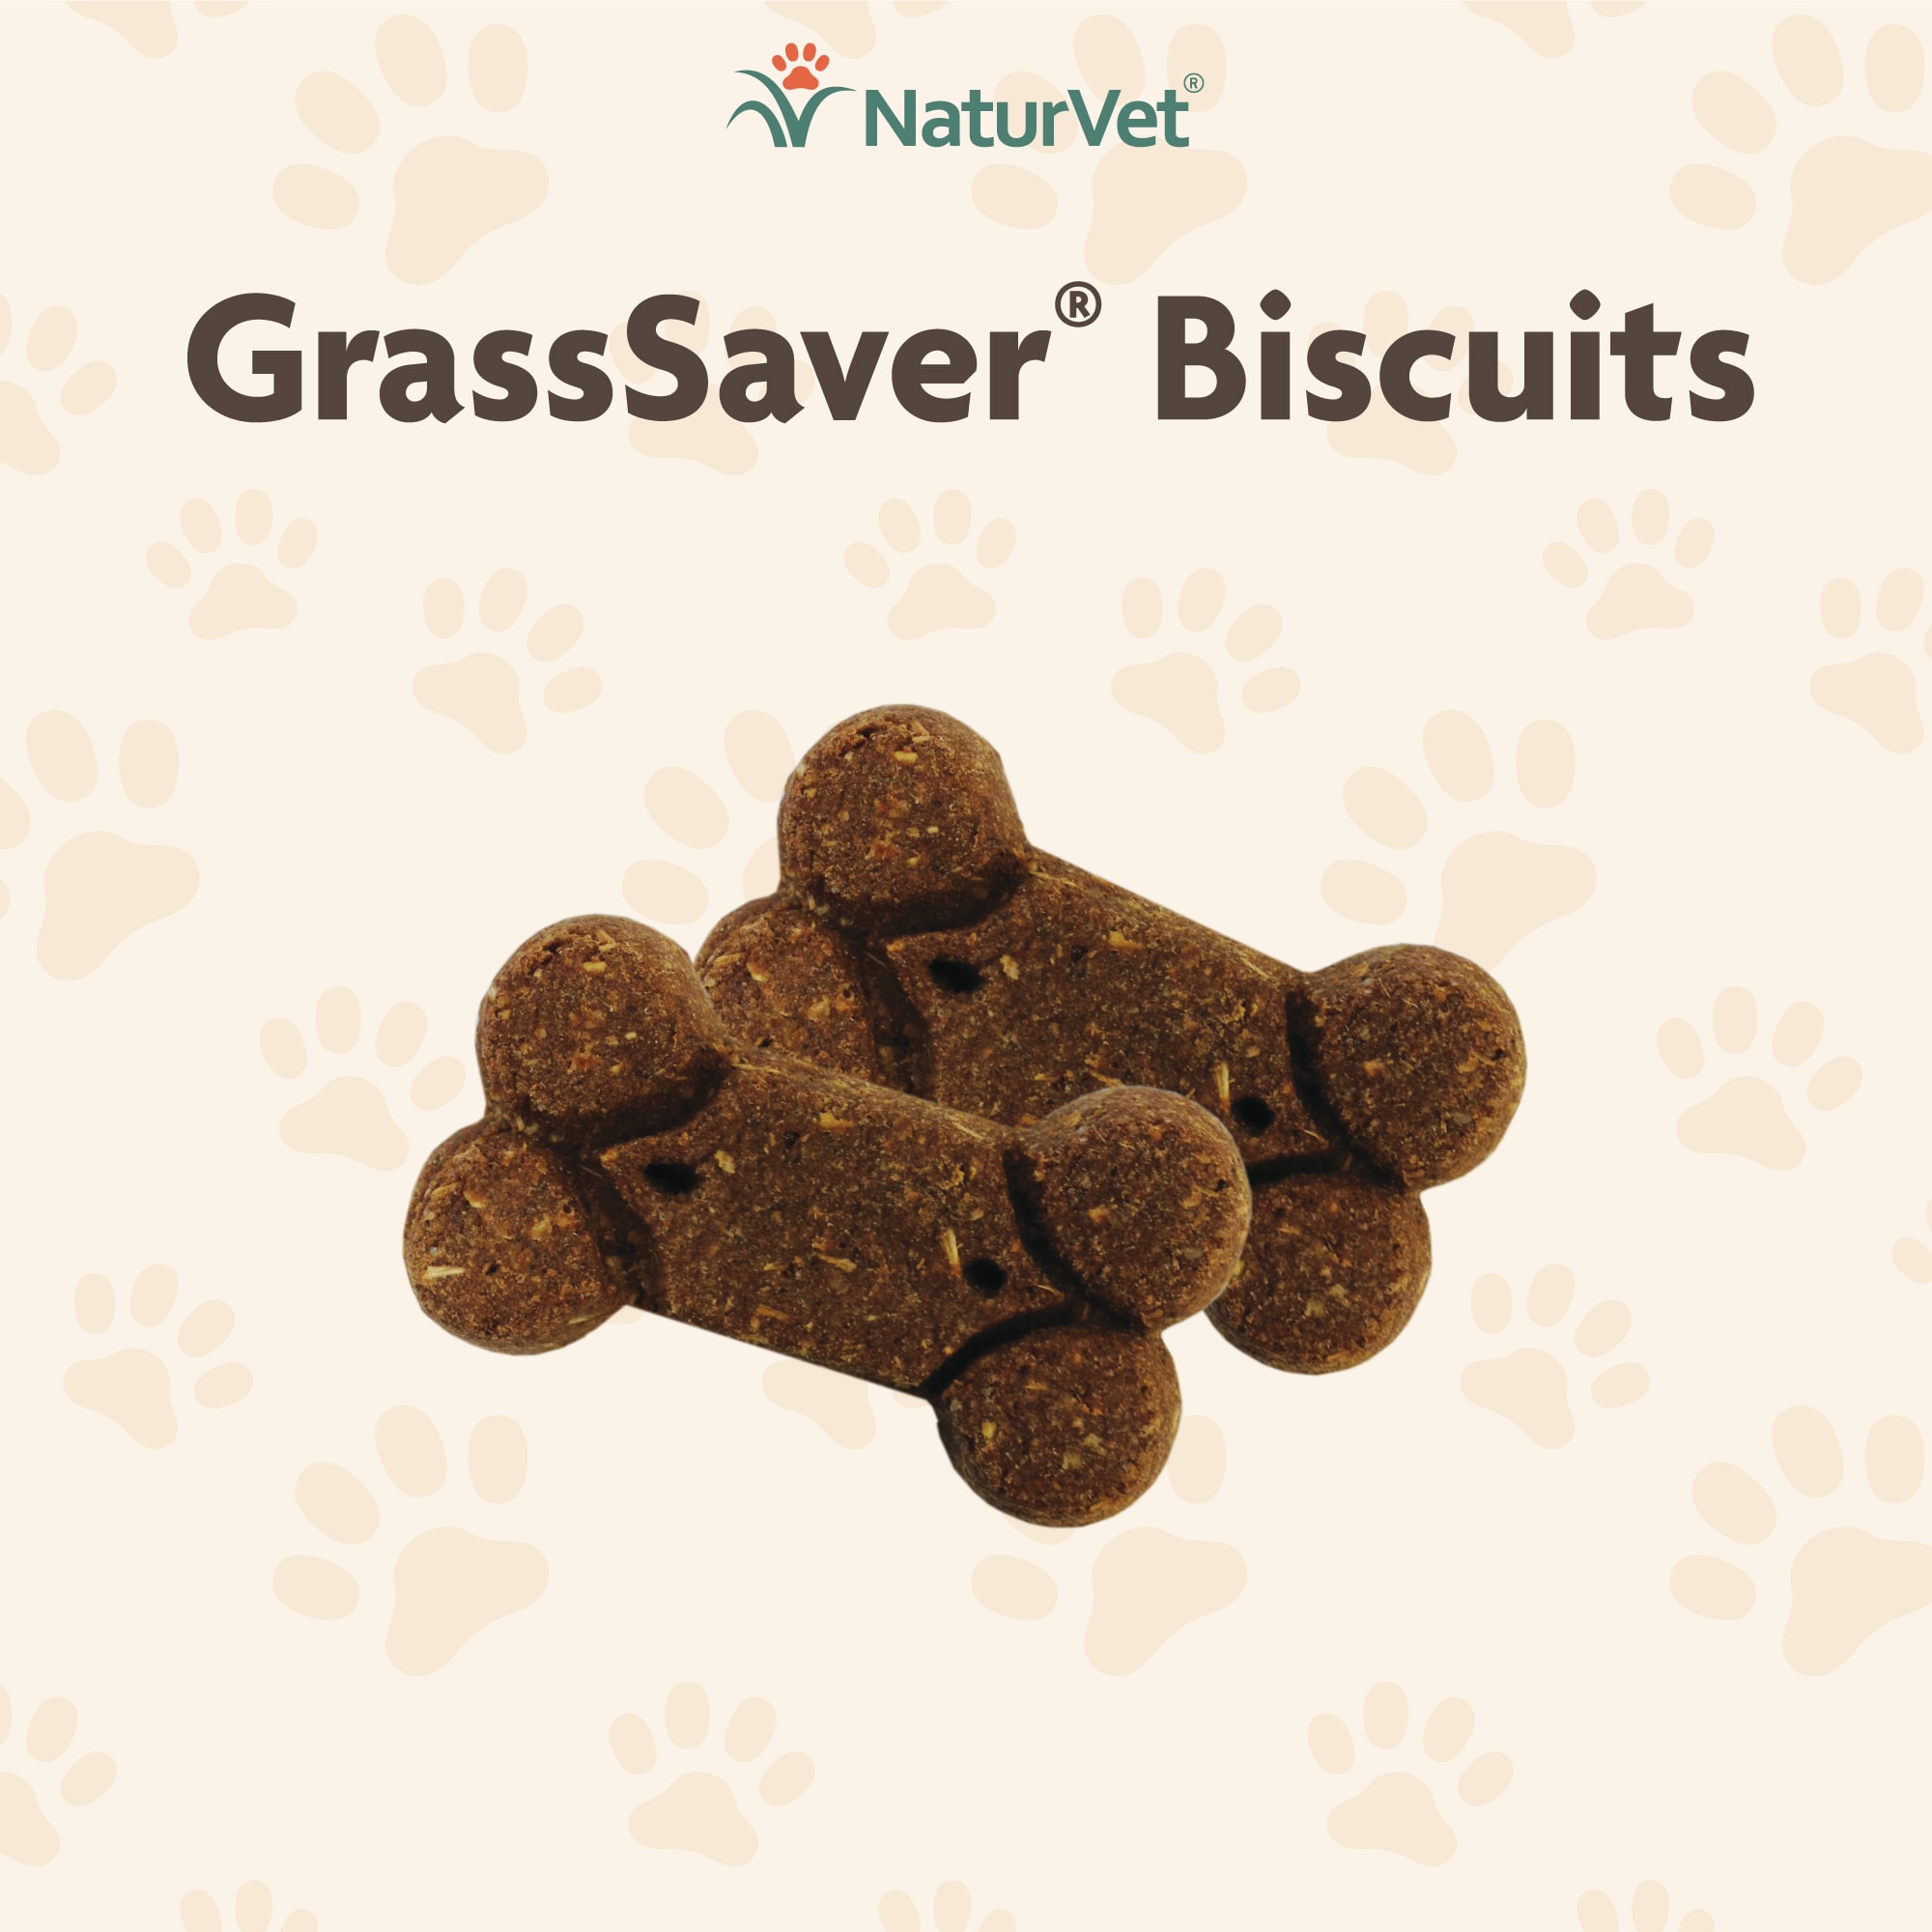 11 oz Biscuits NaturVet GrassSaver Biscuits Peanut Butter Flavor for Dogs Made in USA Garmon Corp 978077